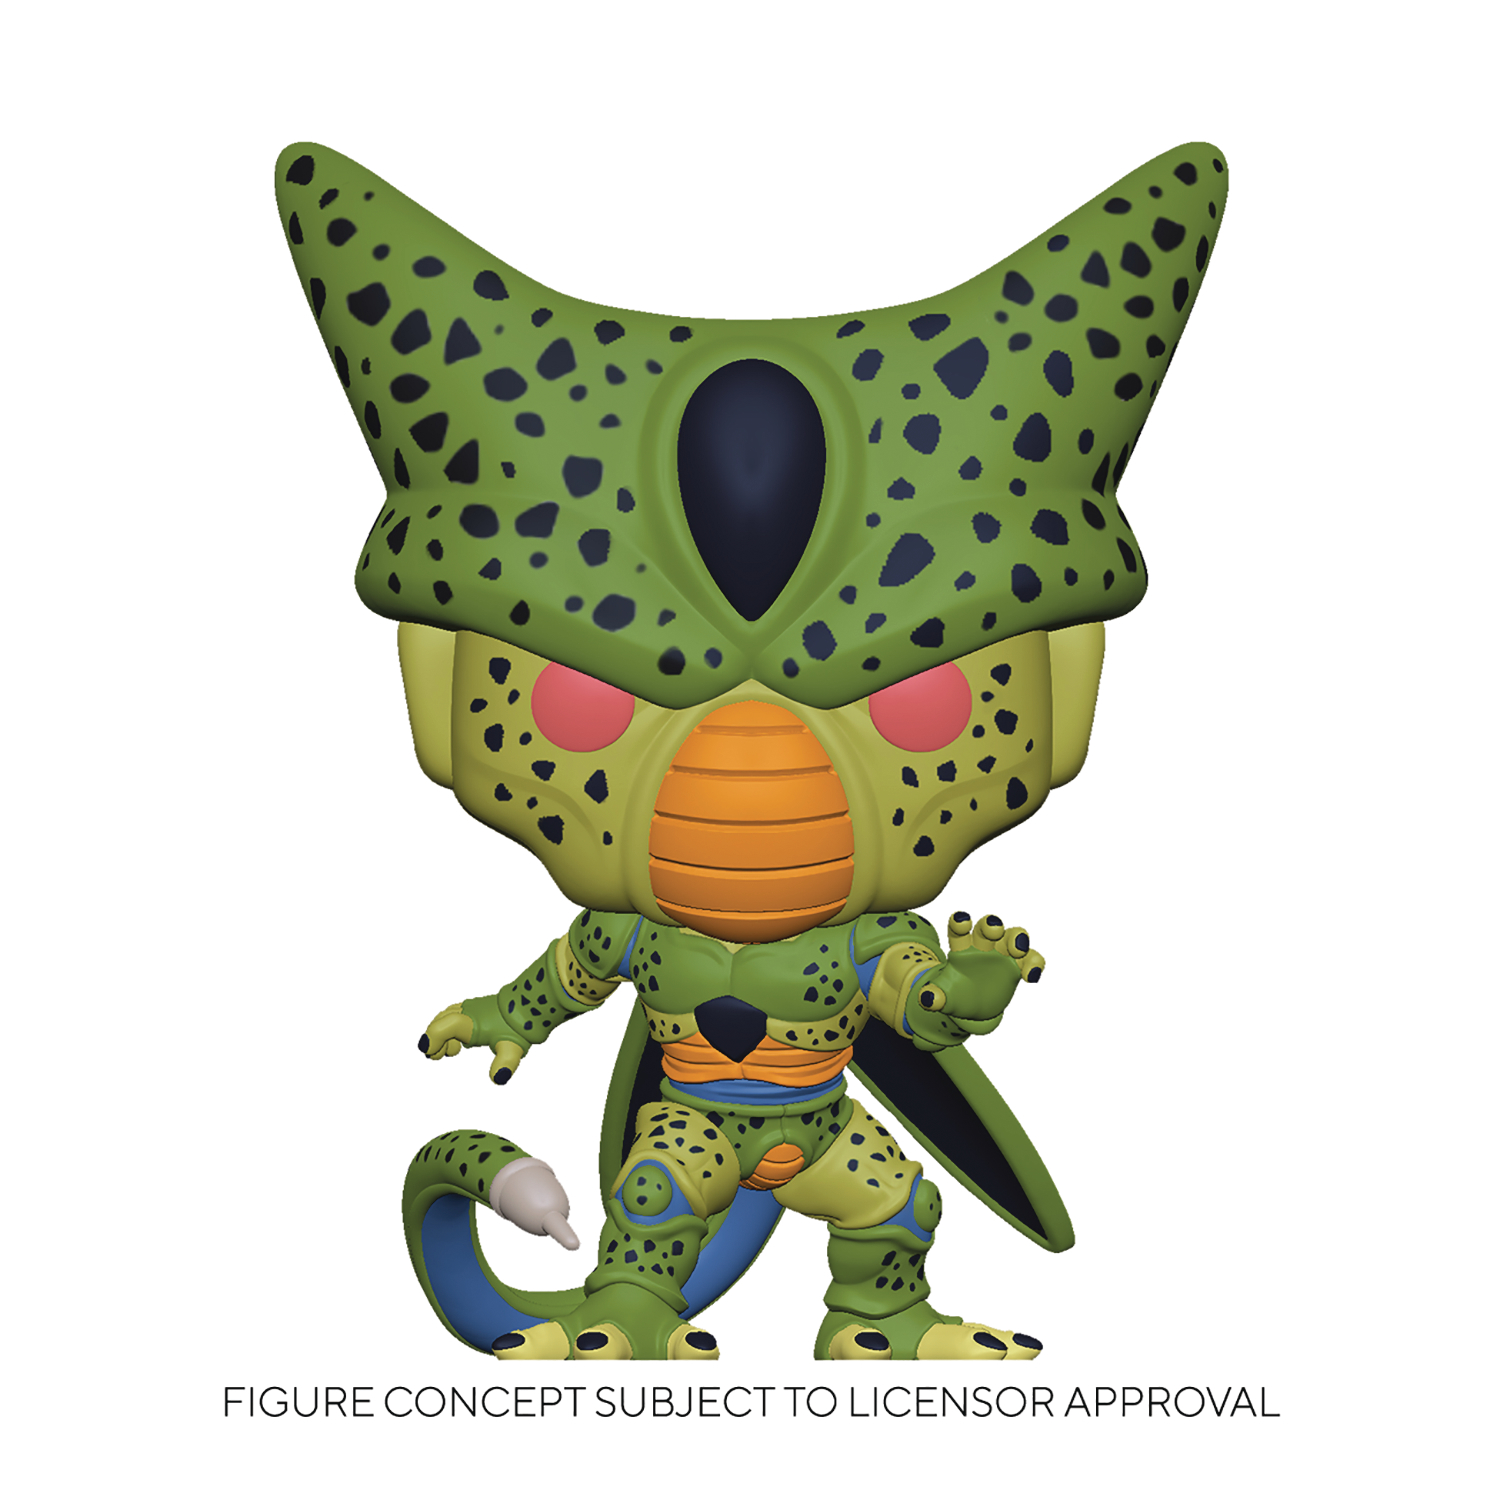 Pop Animation Dragon Ball Z S8 Cell First Form Vinyl Figure